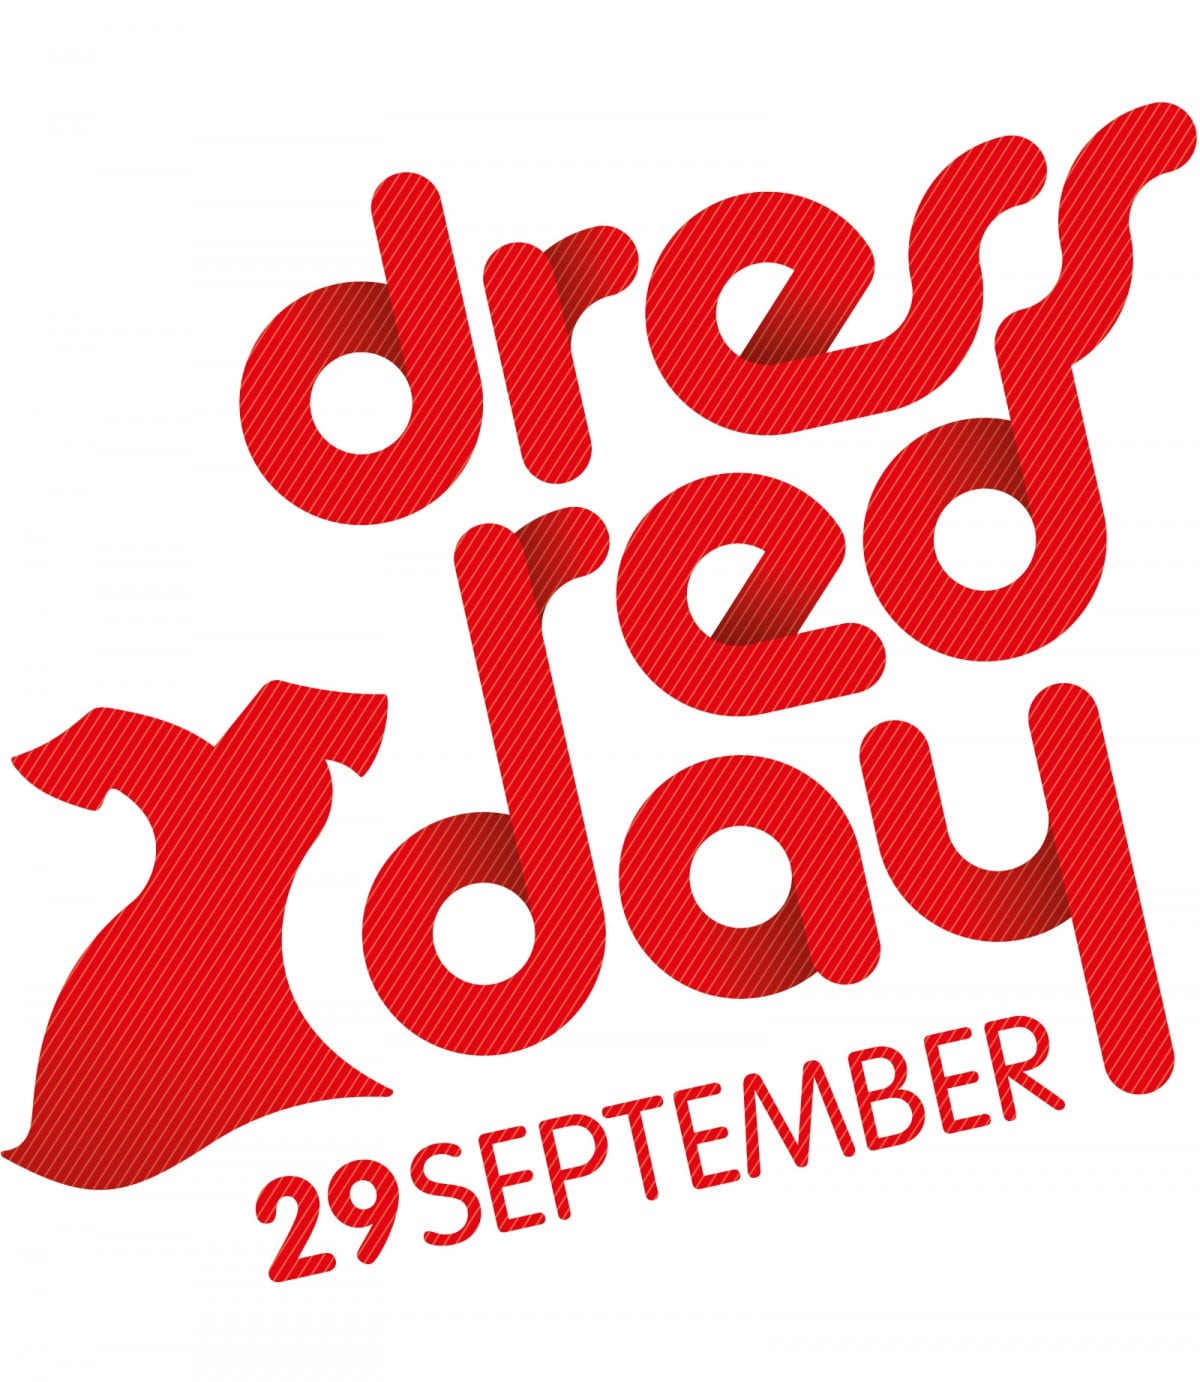 10 x red hot items voor Dress Red Day